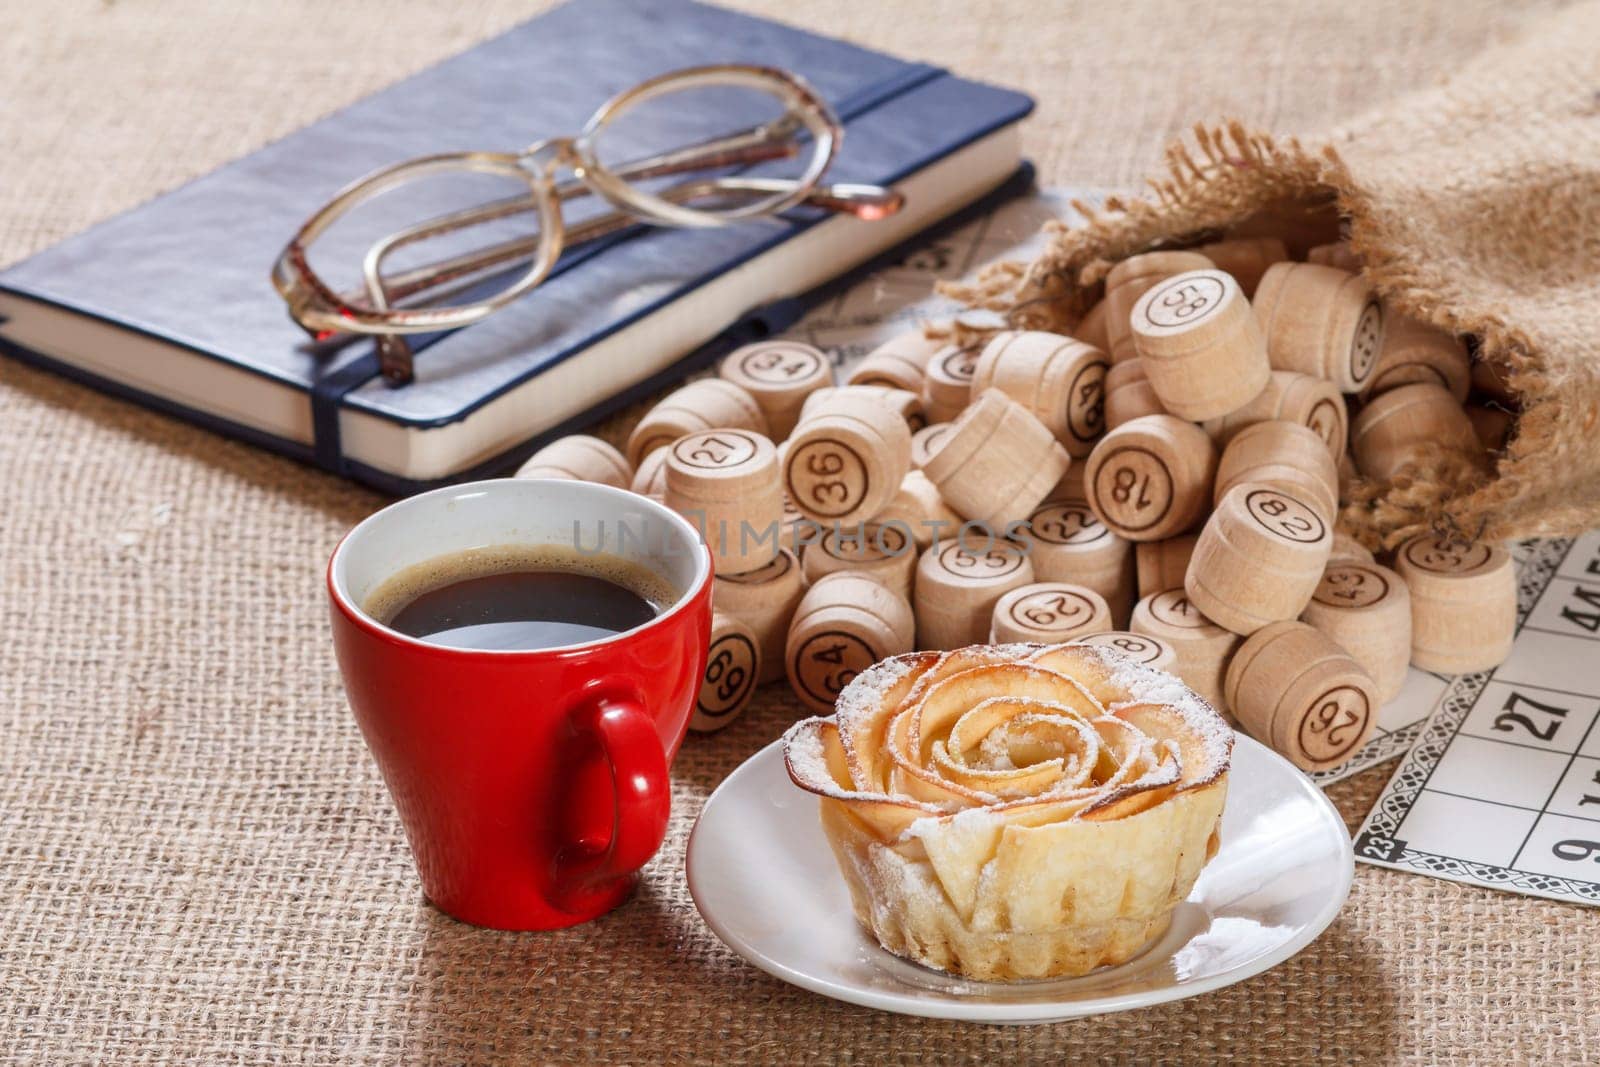 Wooden lotto barrels in sac and game cards for a game in lotto with notebook, glasses, red cup of coffee and homemade biscuit in the form of rose on white saucer.